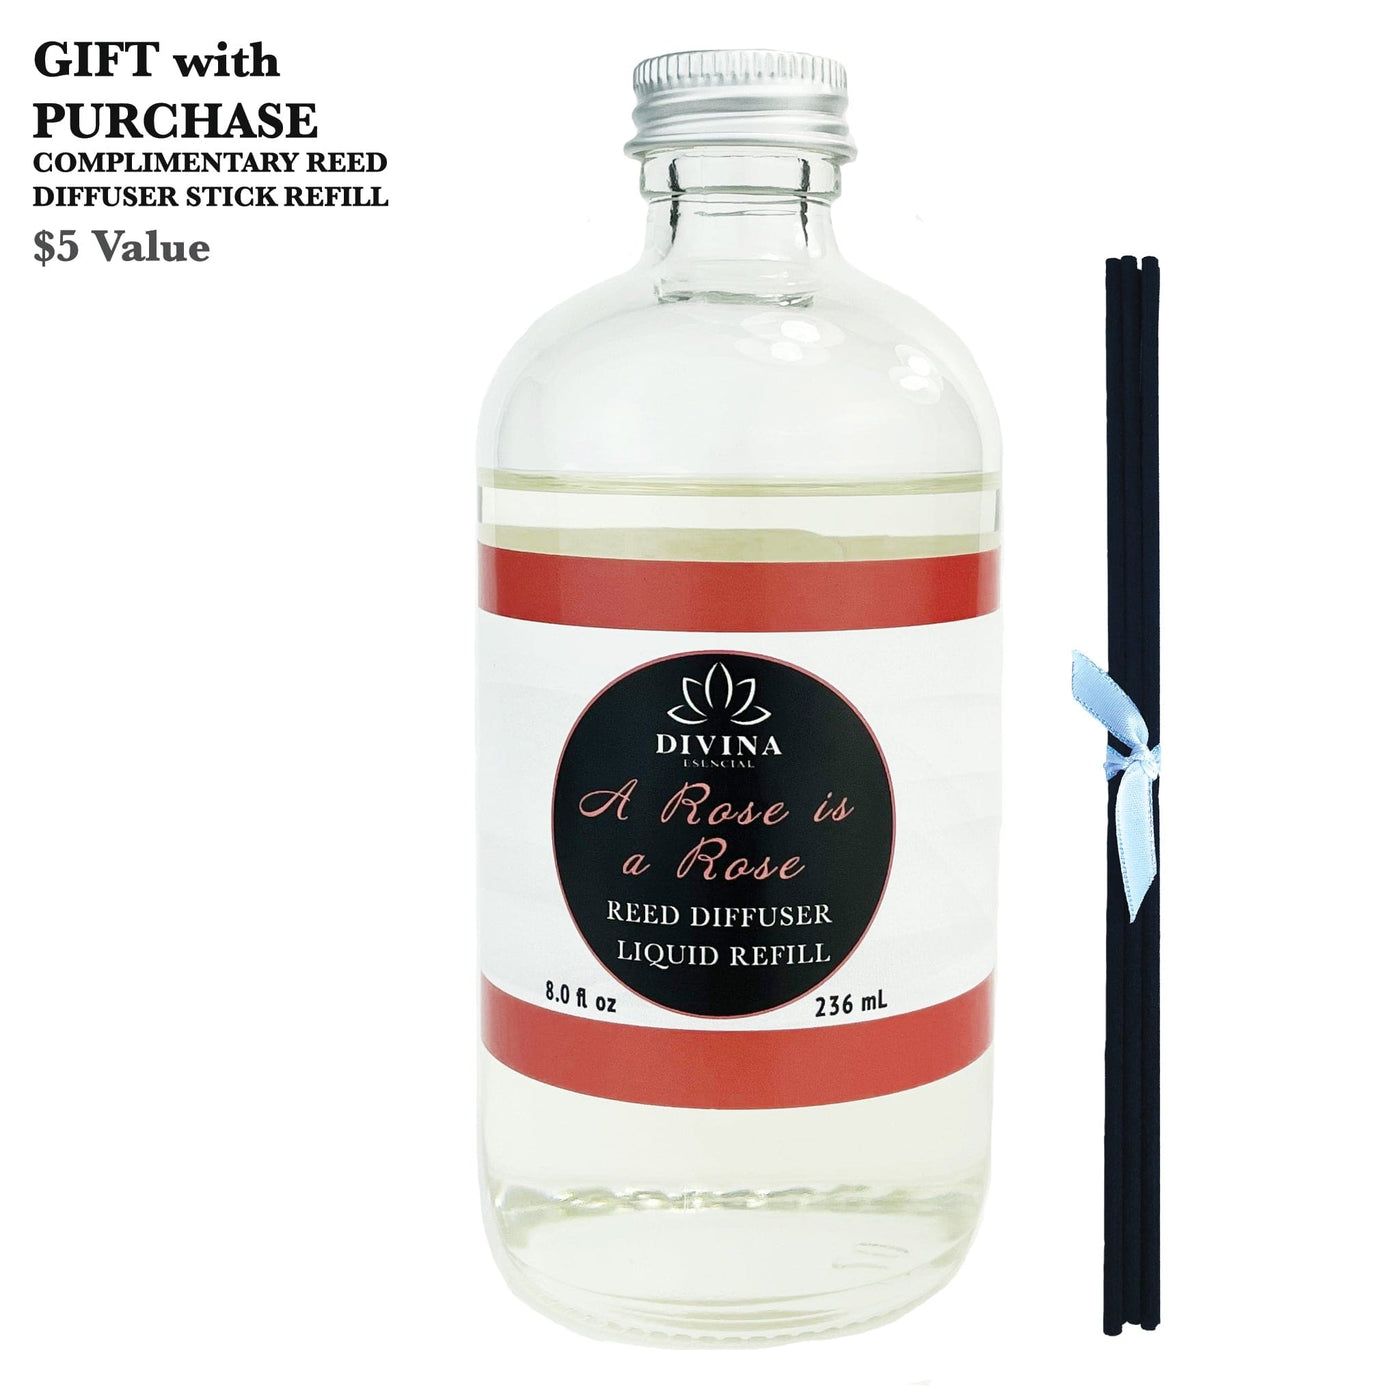 A Rose is A Rose Reed Diffuser Liquid Refill